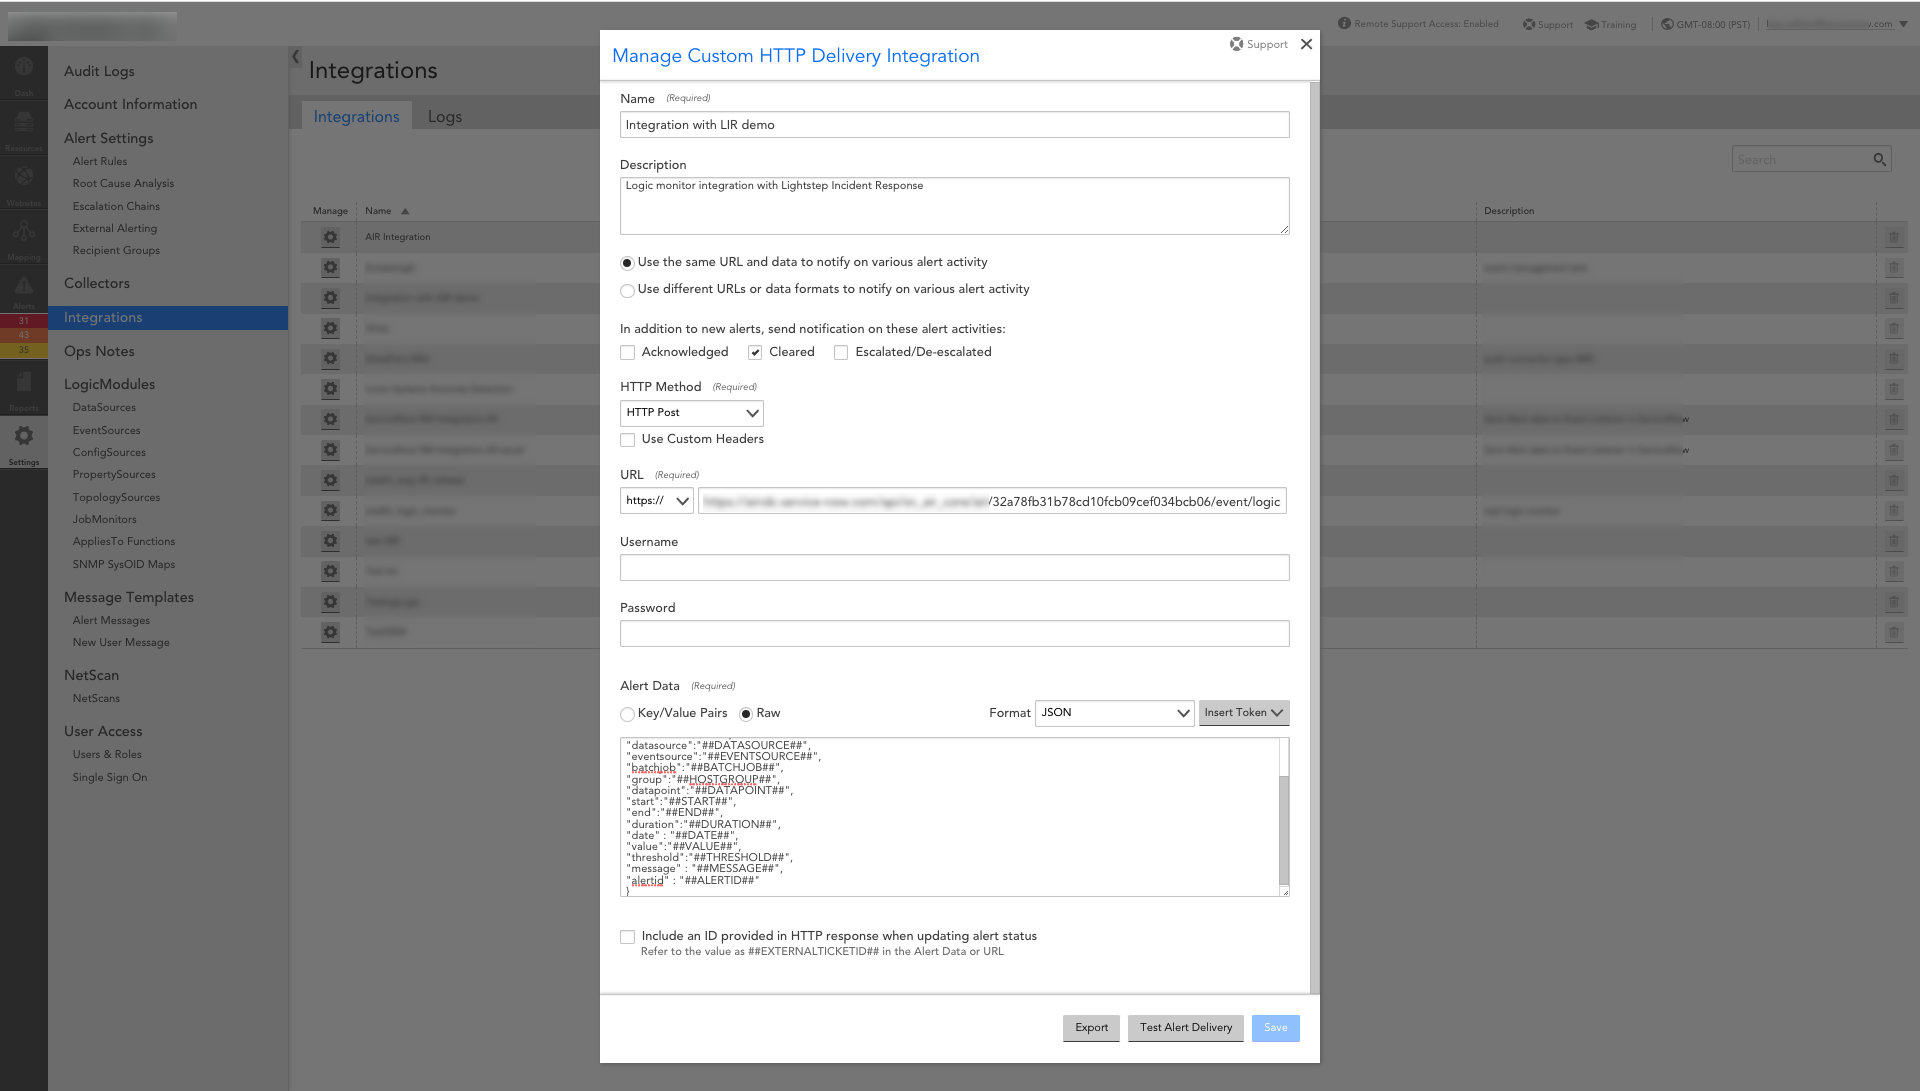 Manage Custom HTTP Delivery Integration dialog box.